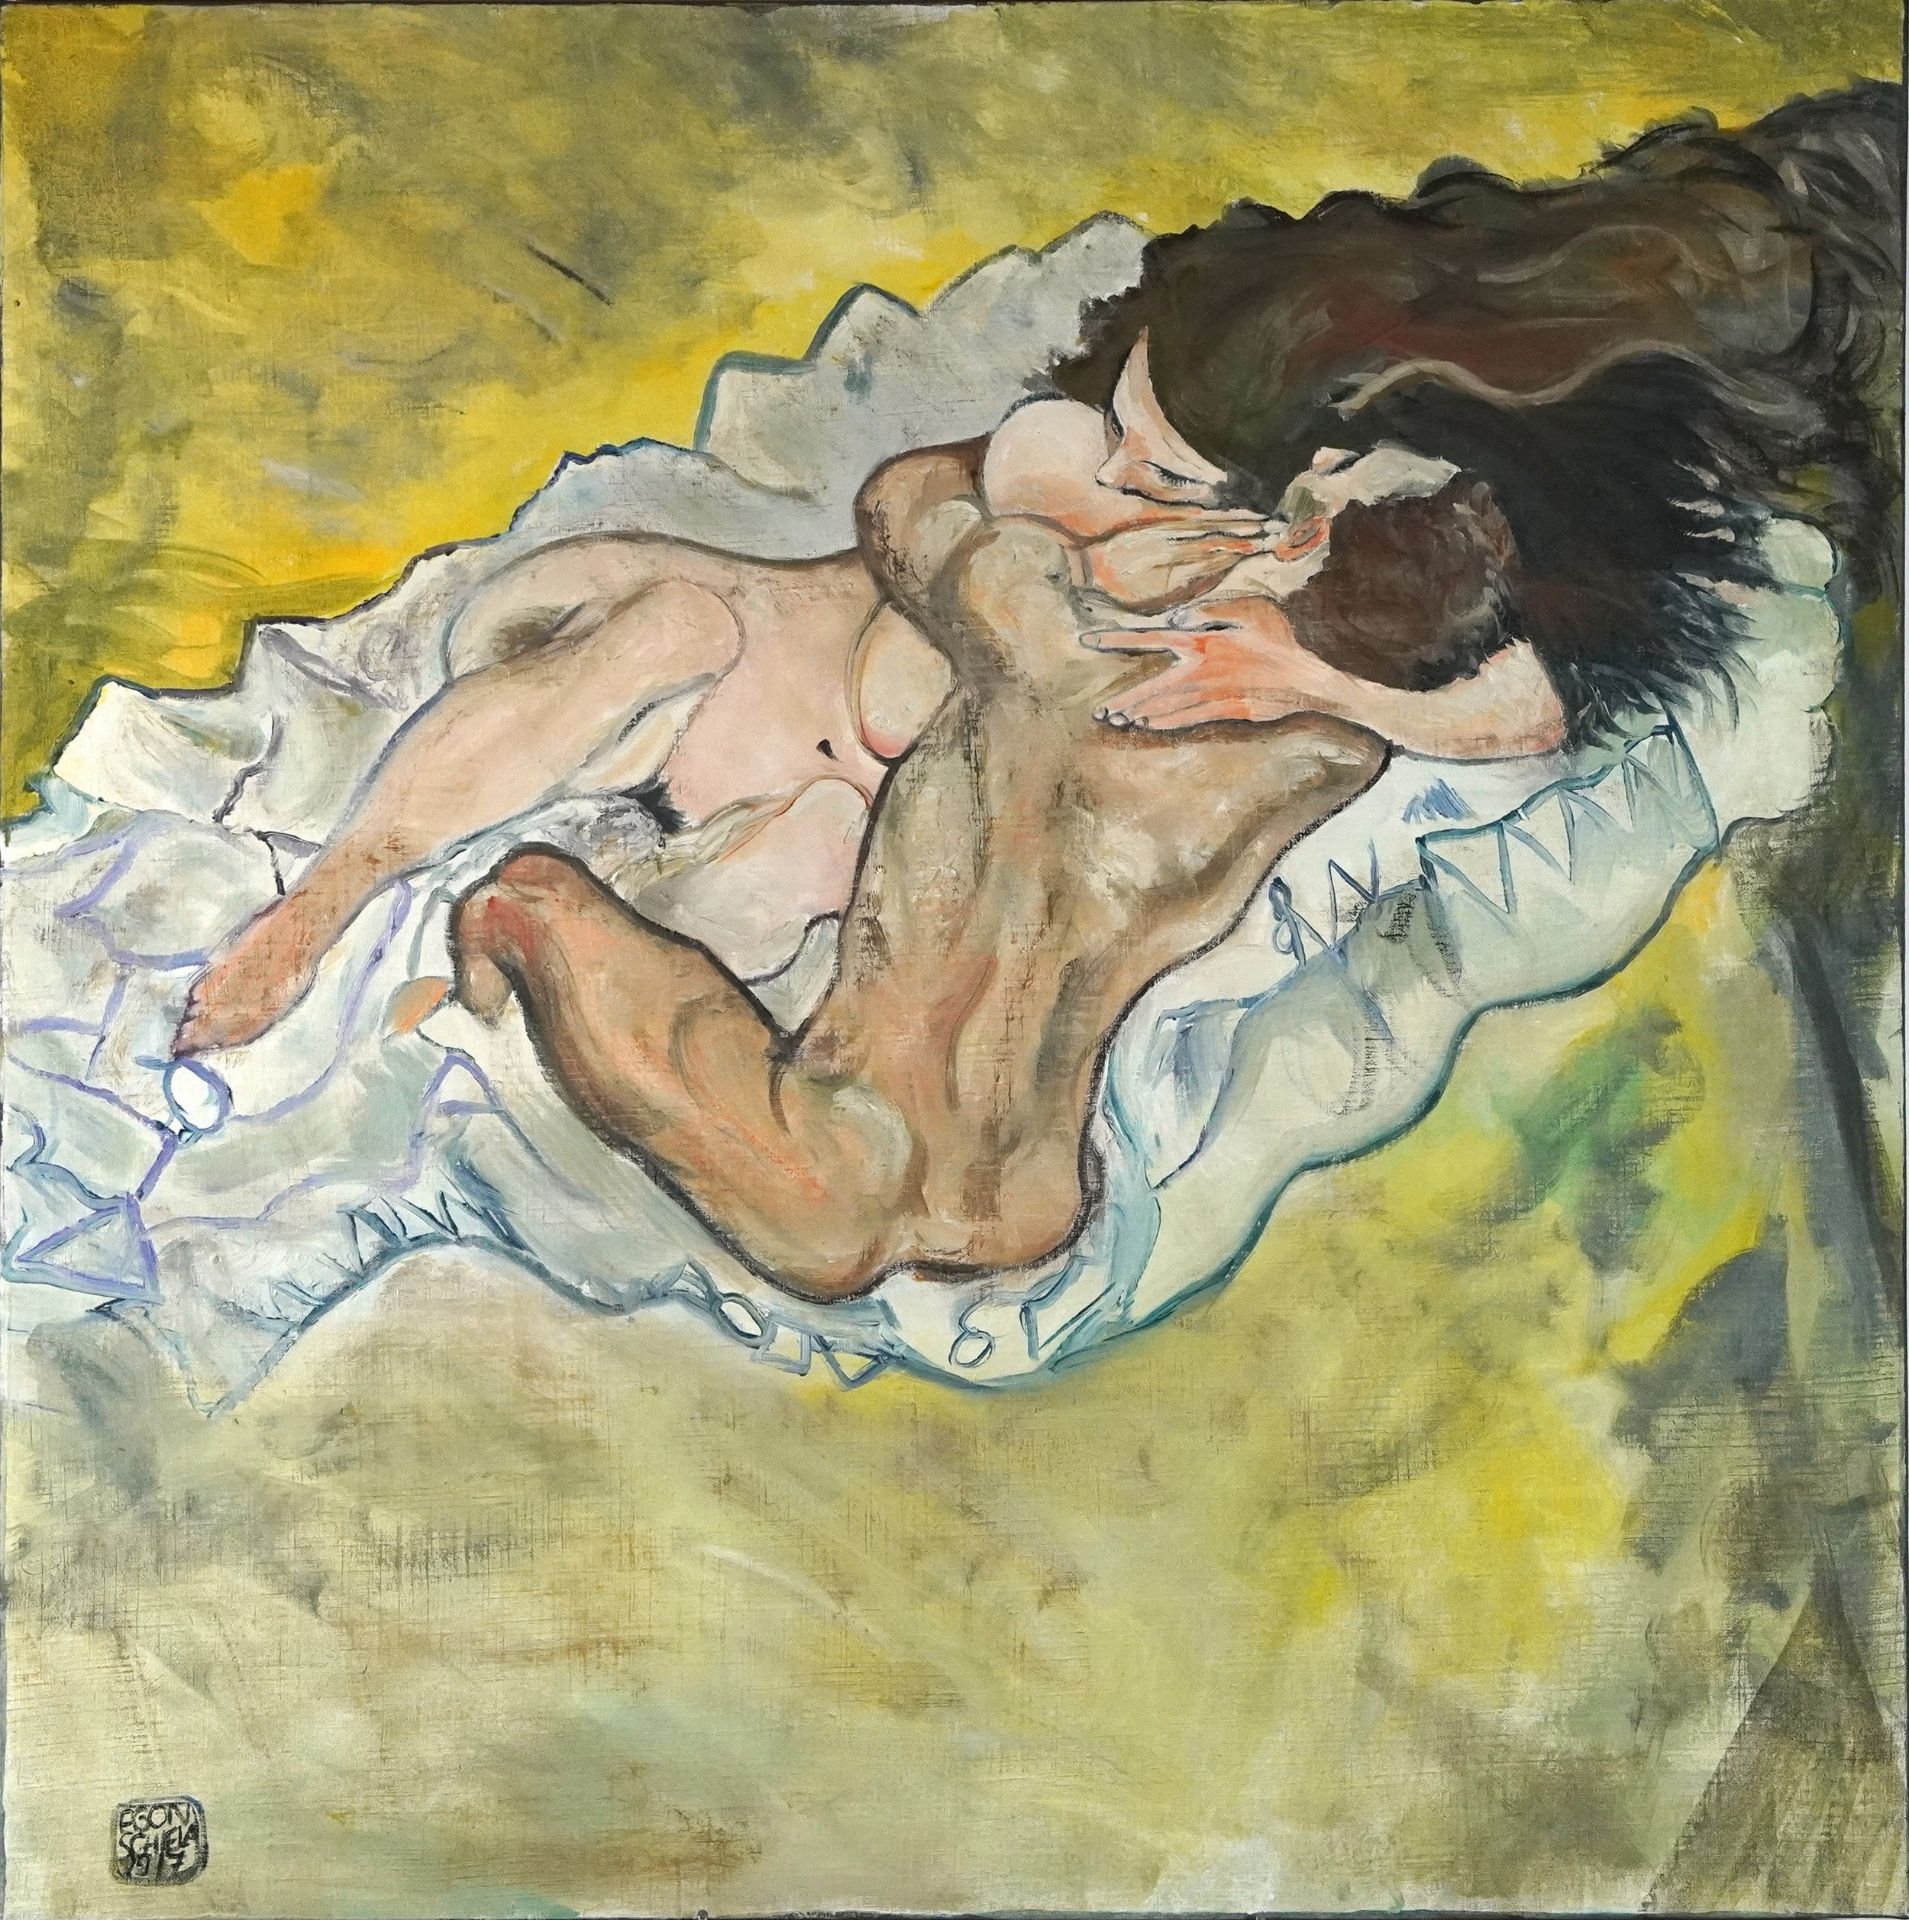 Clive Fredriksson after Egon Schiele - Nude lovers, contemporary oil on canvas, unframed, 100.5cm